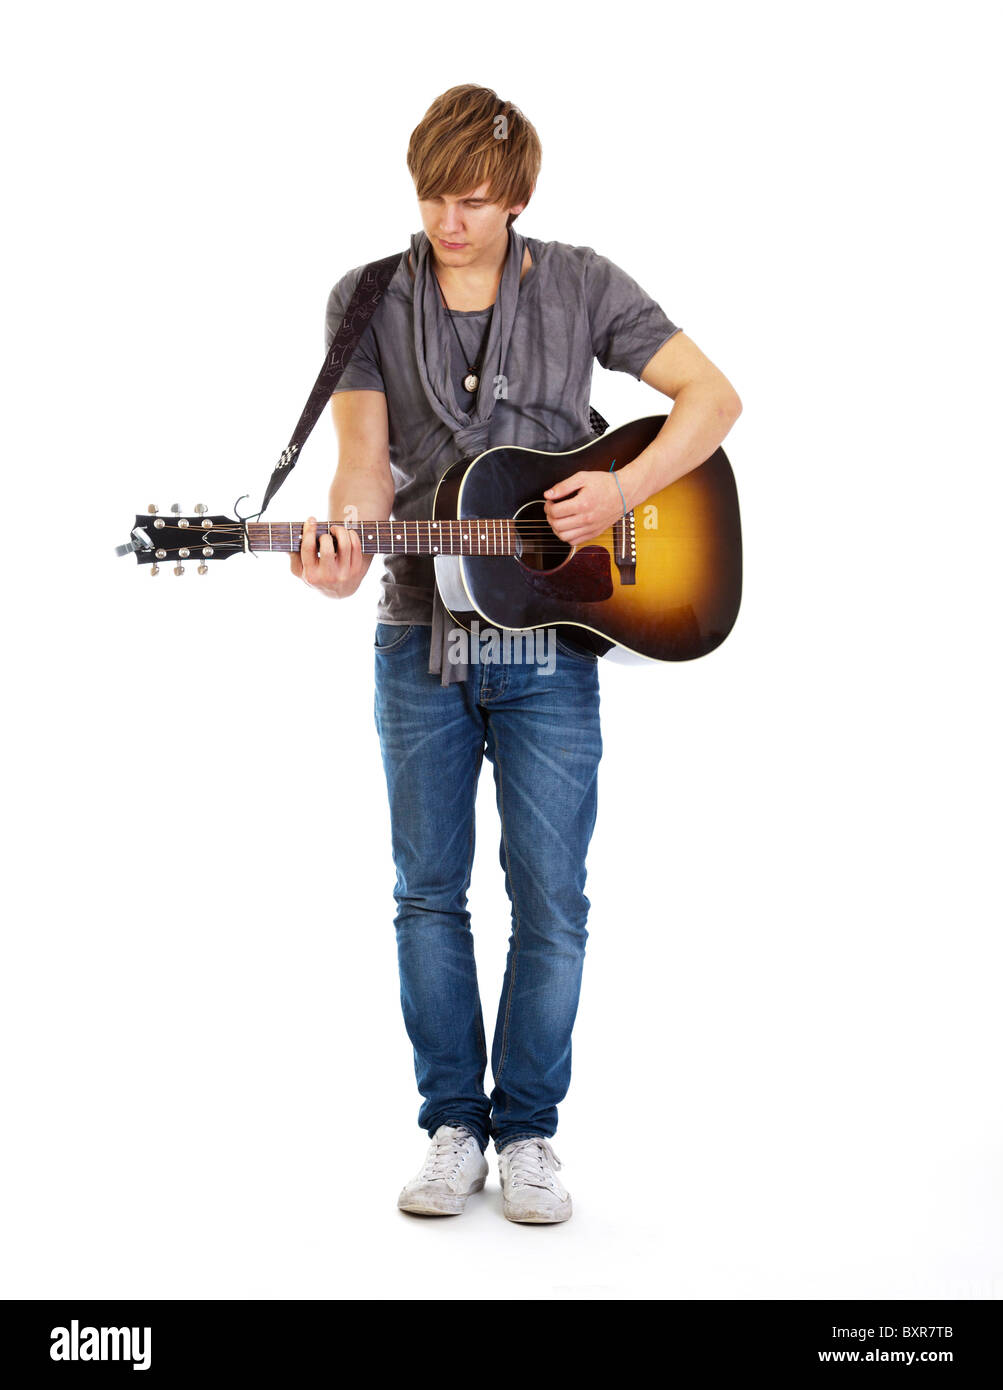 young man playing a guitar Stock Photo